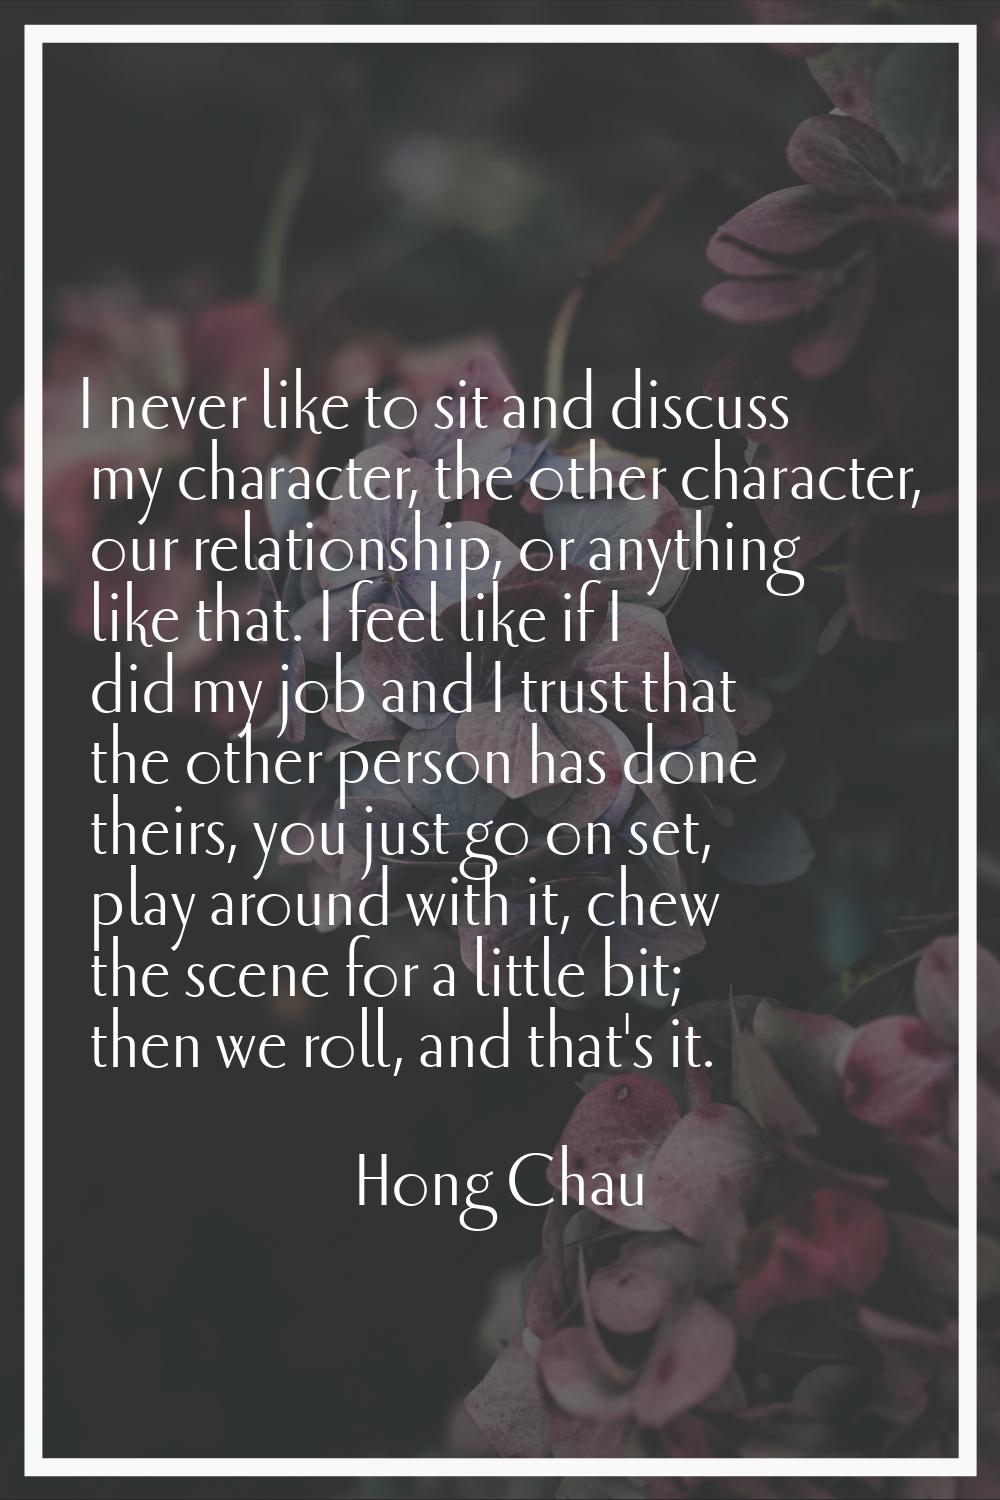 I never like to sit and discuss my character, the other character, our relationship, or anything li